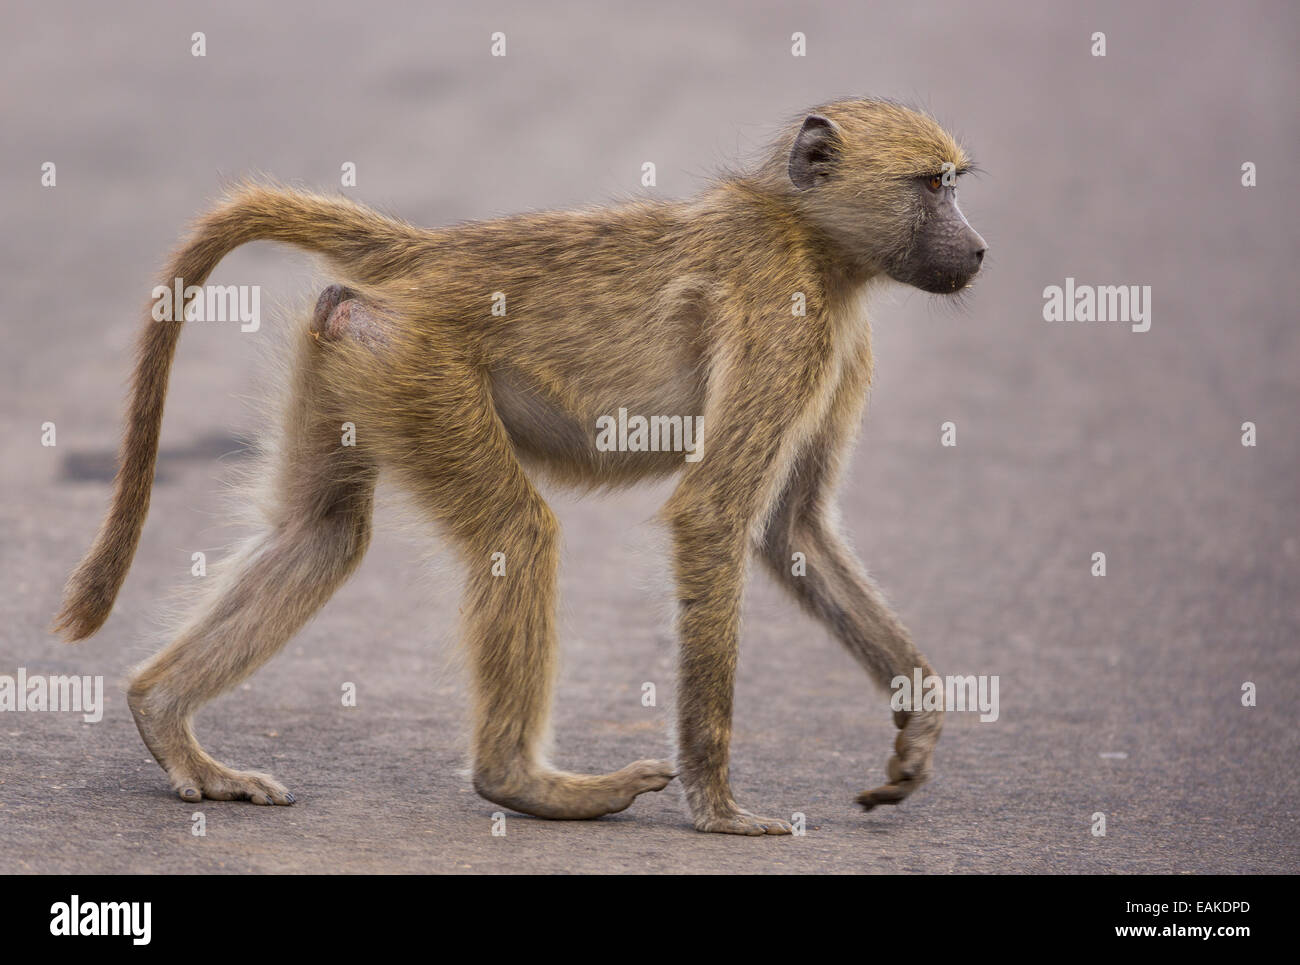 KRUGER NATIONAL PARK, SOUTH AFRICA - Baboon crossing road Stock Photo